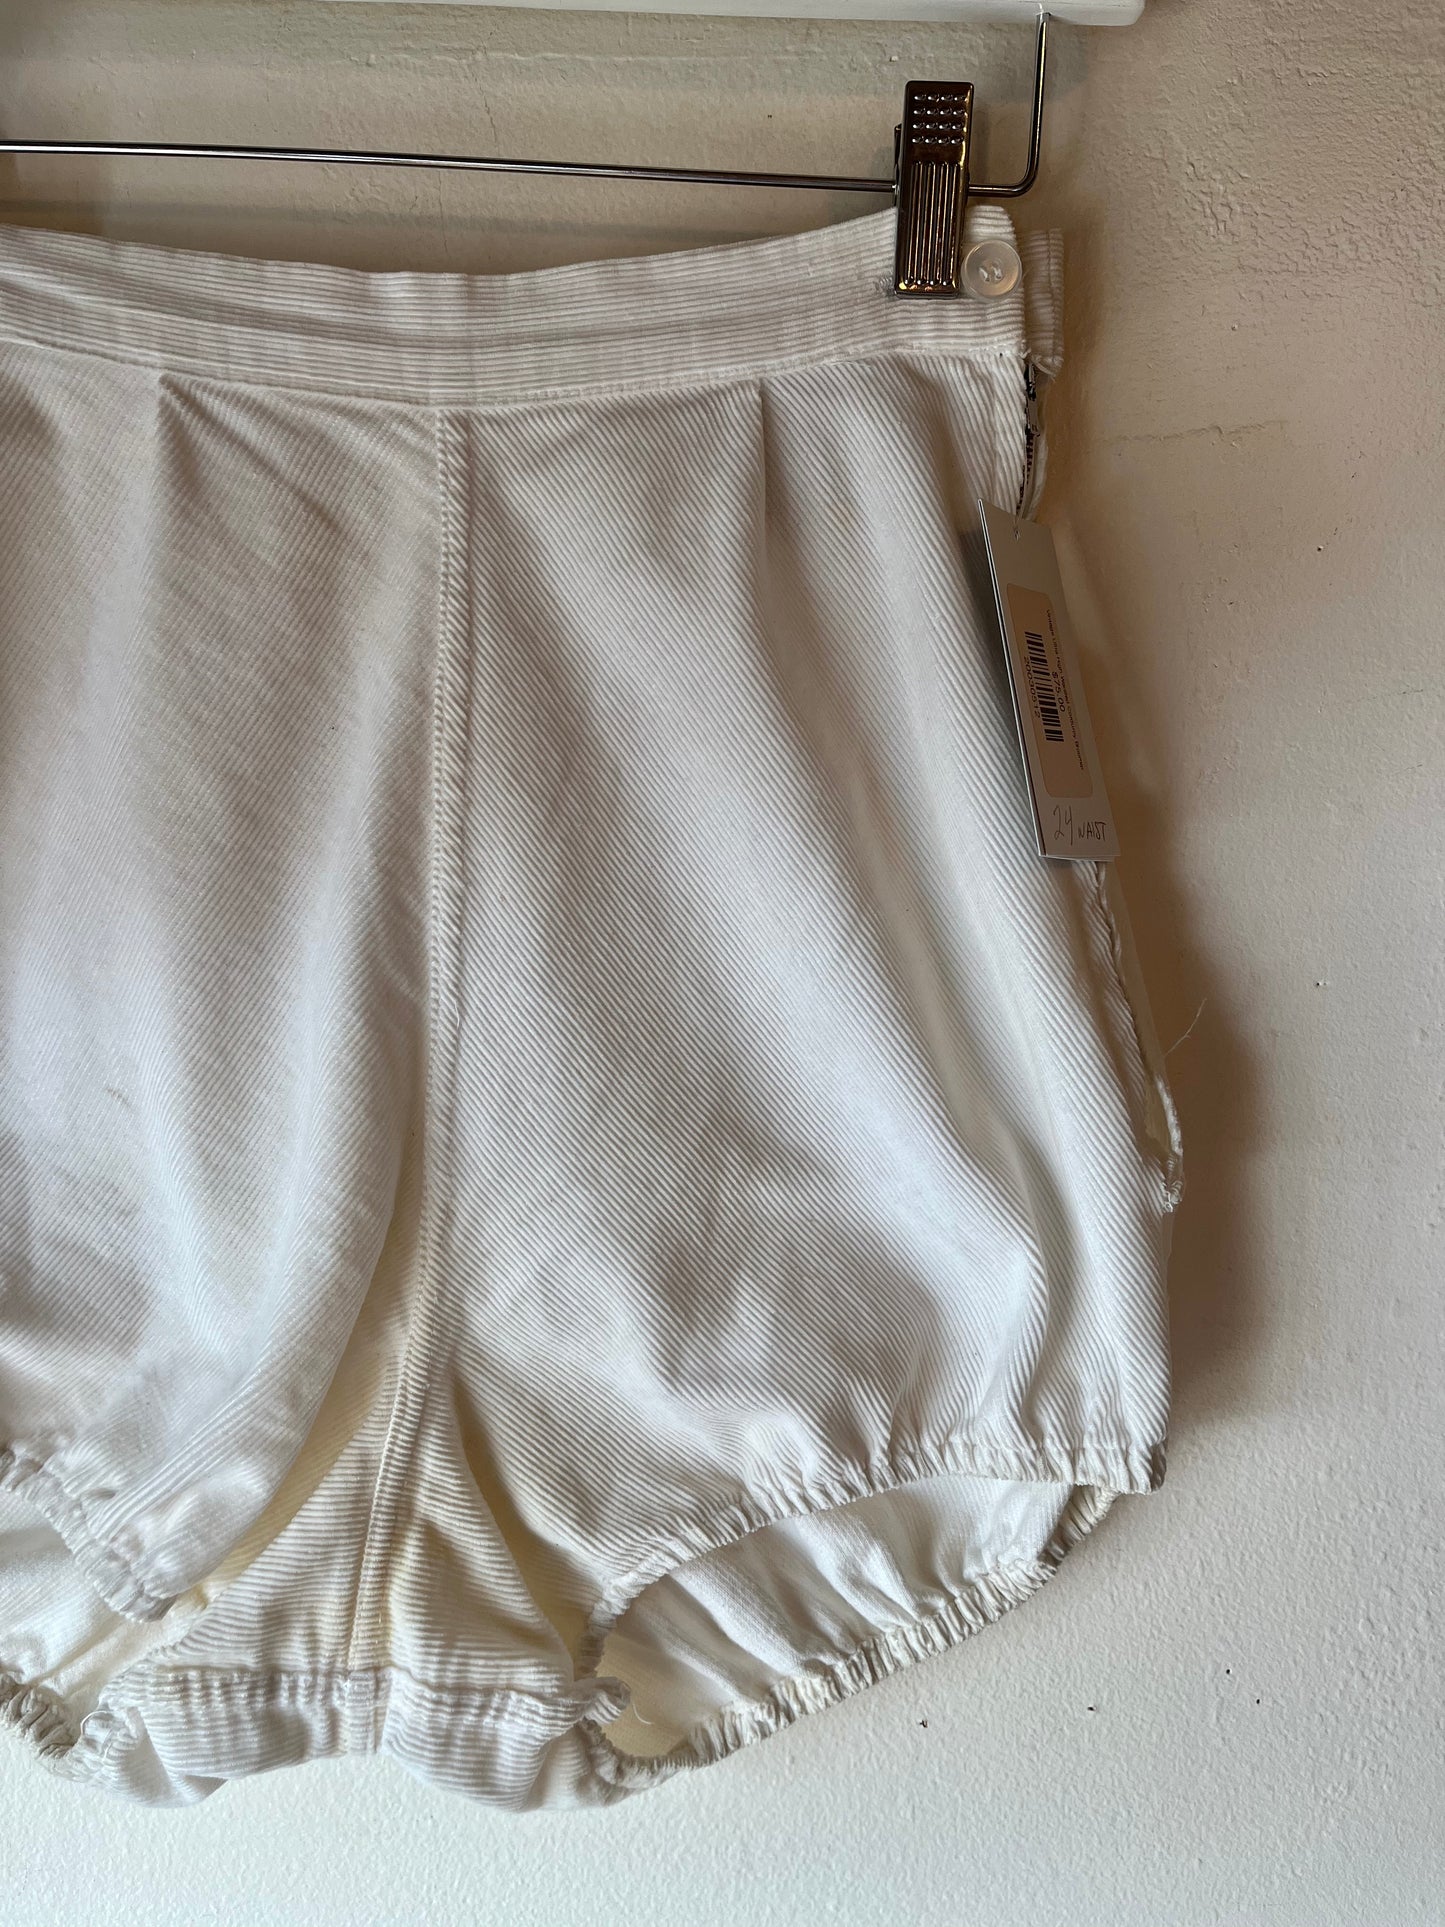 Vintage Ultra High Waisted Corduroy Bloomers -as is- 24W